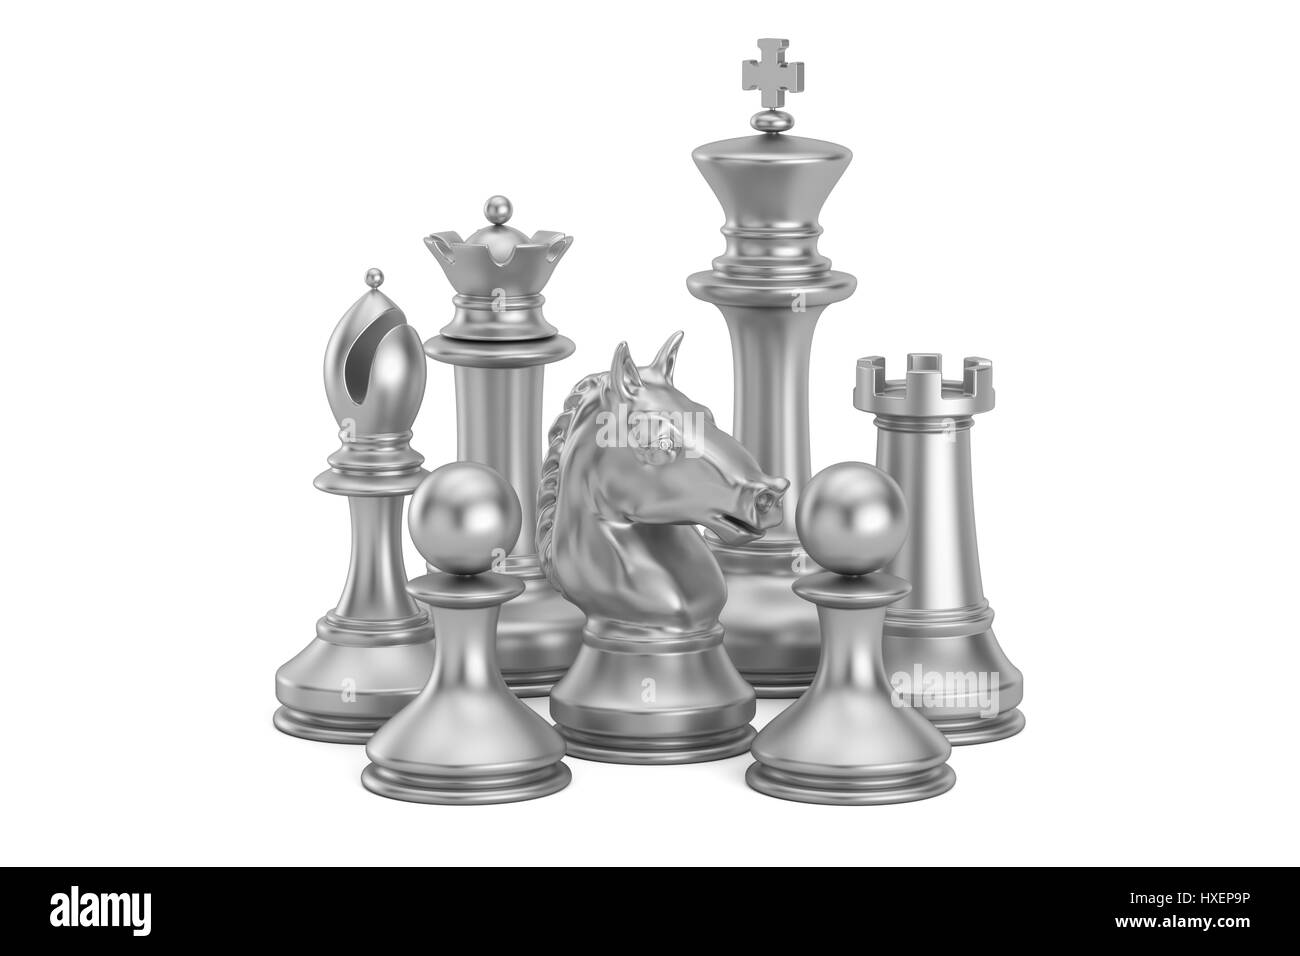 Silver Chess Figures 3d Rendering Isolated On White Background Stock